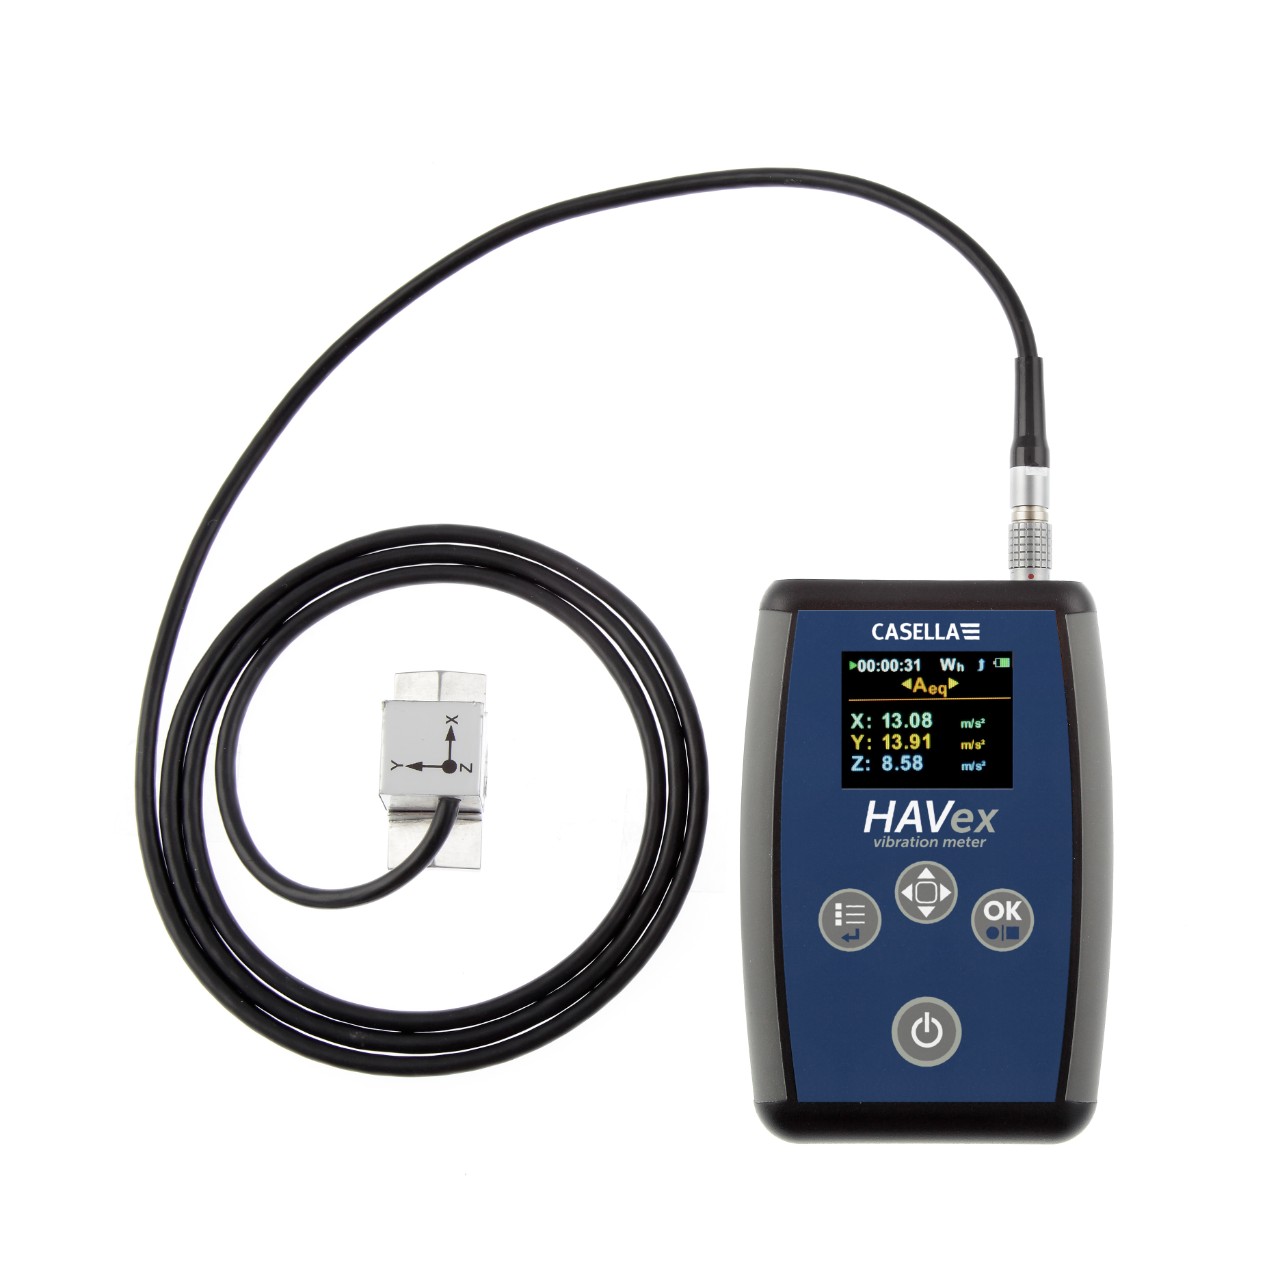 Casella's HAVex for hand arm vibration monitoring